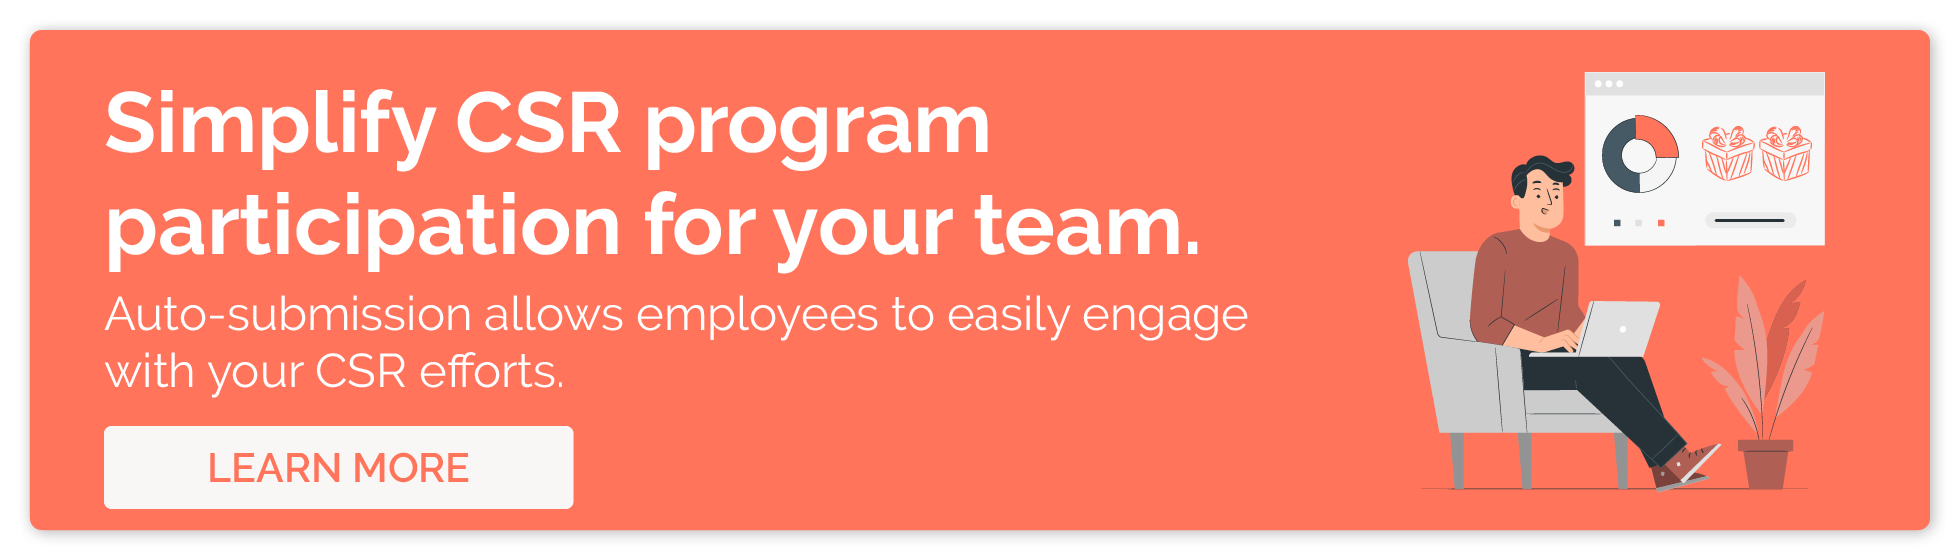 Make it easier for employees to engage in your CSR program with matching gift suto-submission.